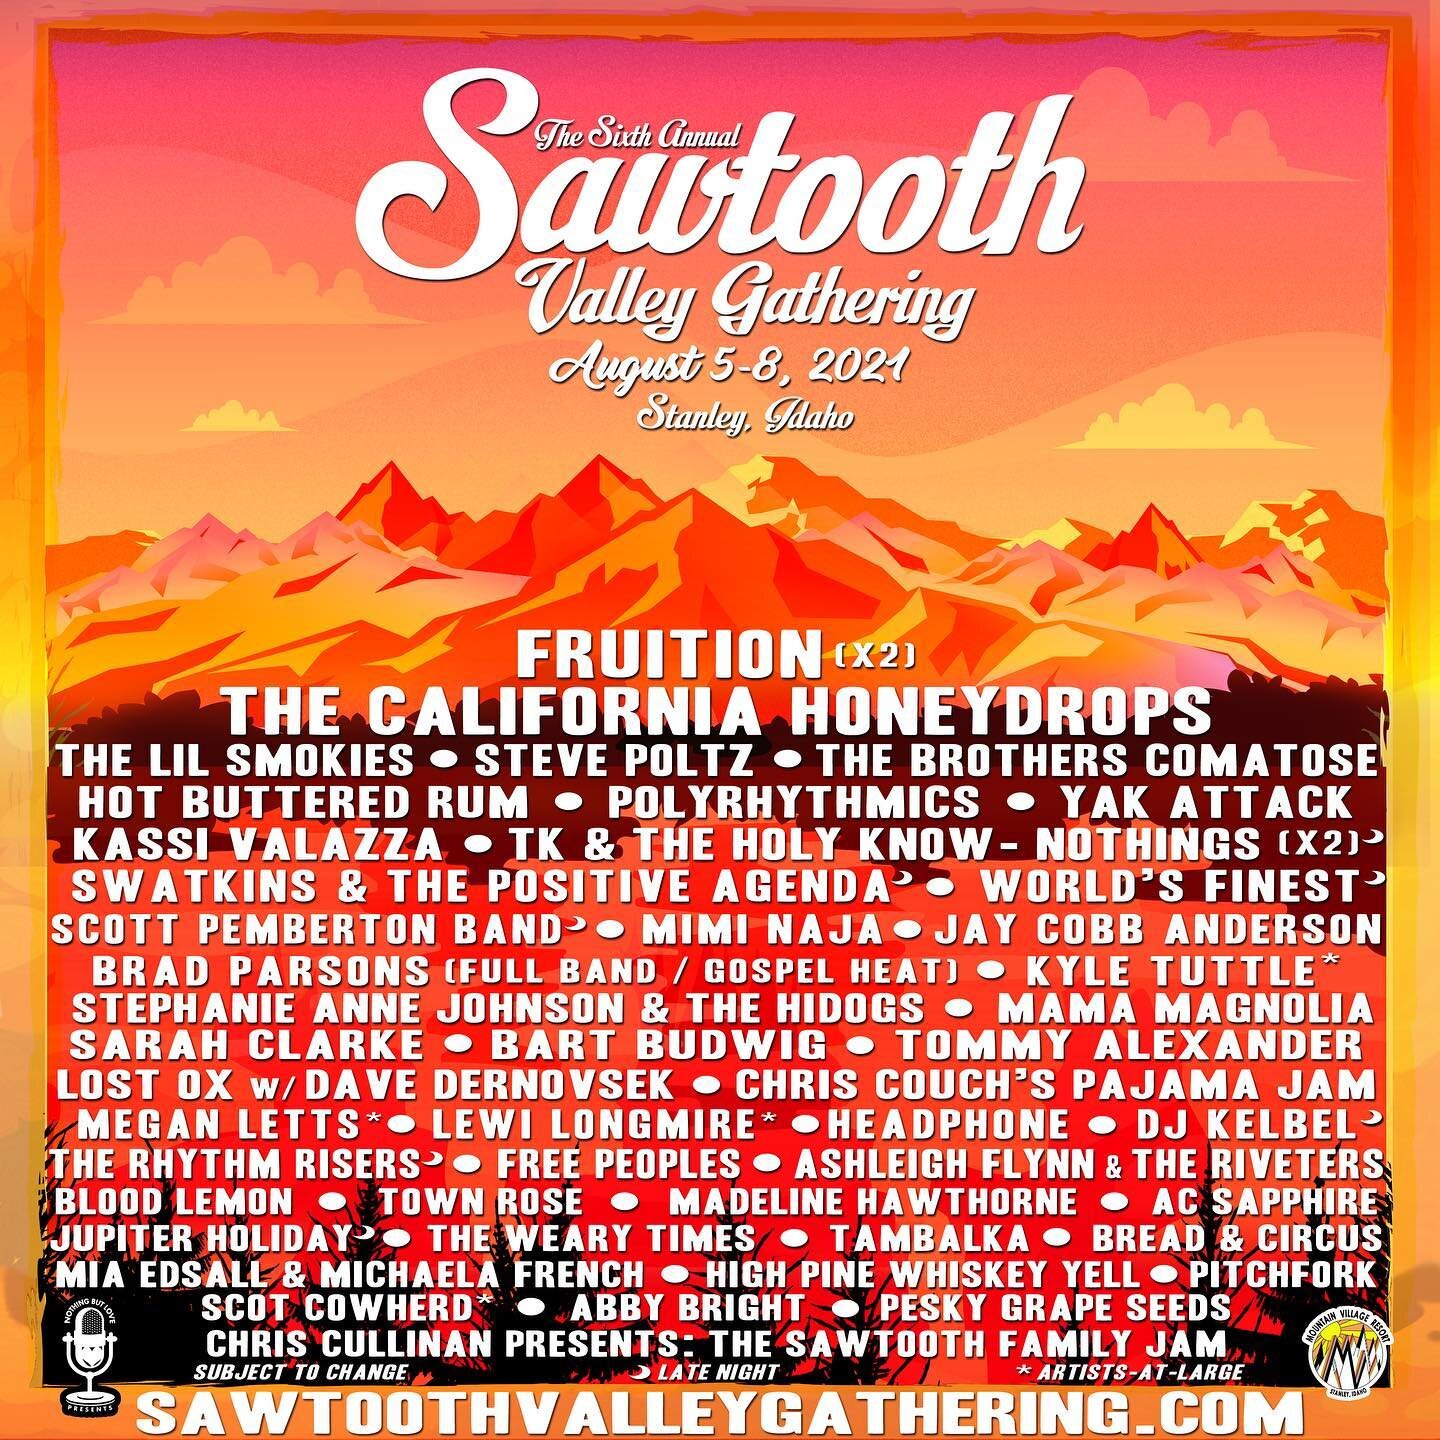 We&rsquo;re excited and increasingly optimistic to announce we&rsquo;ll be performing in August at @sawtoothvalleygathering